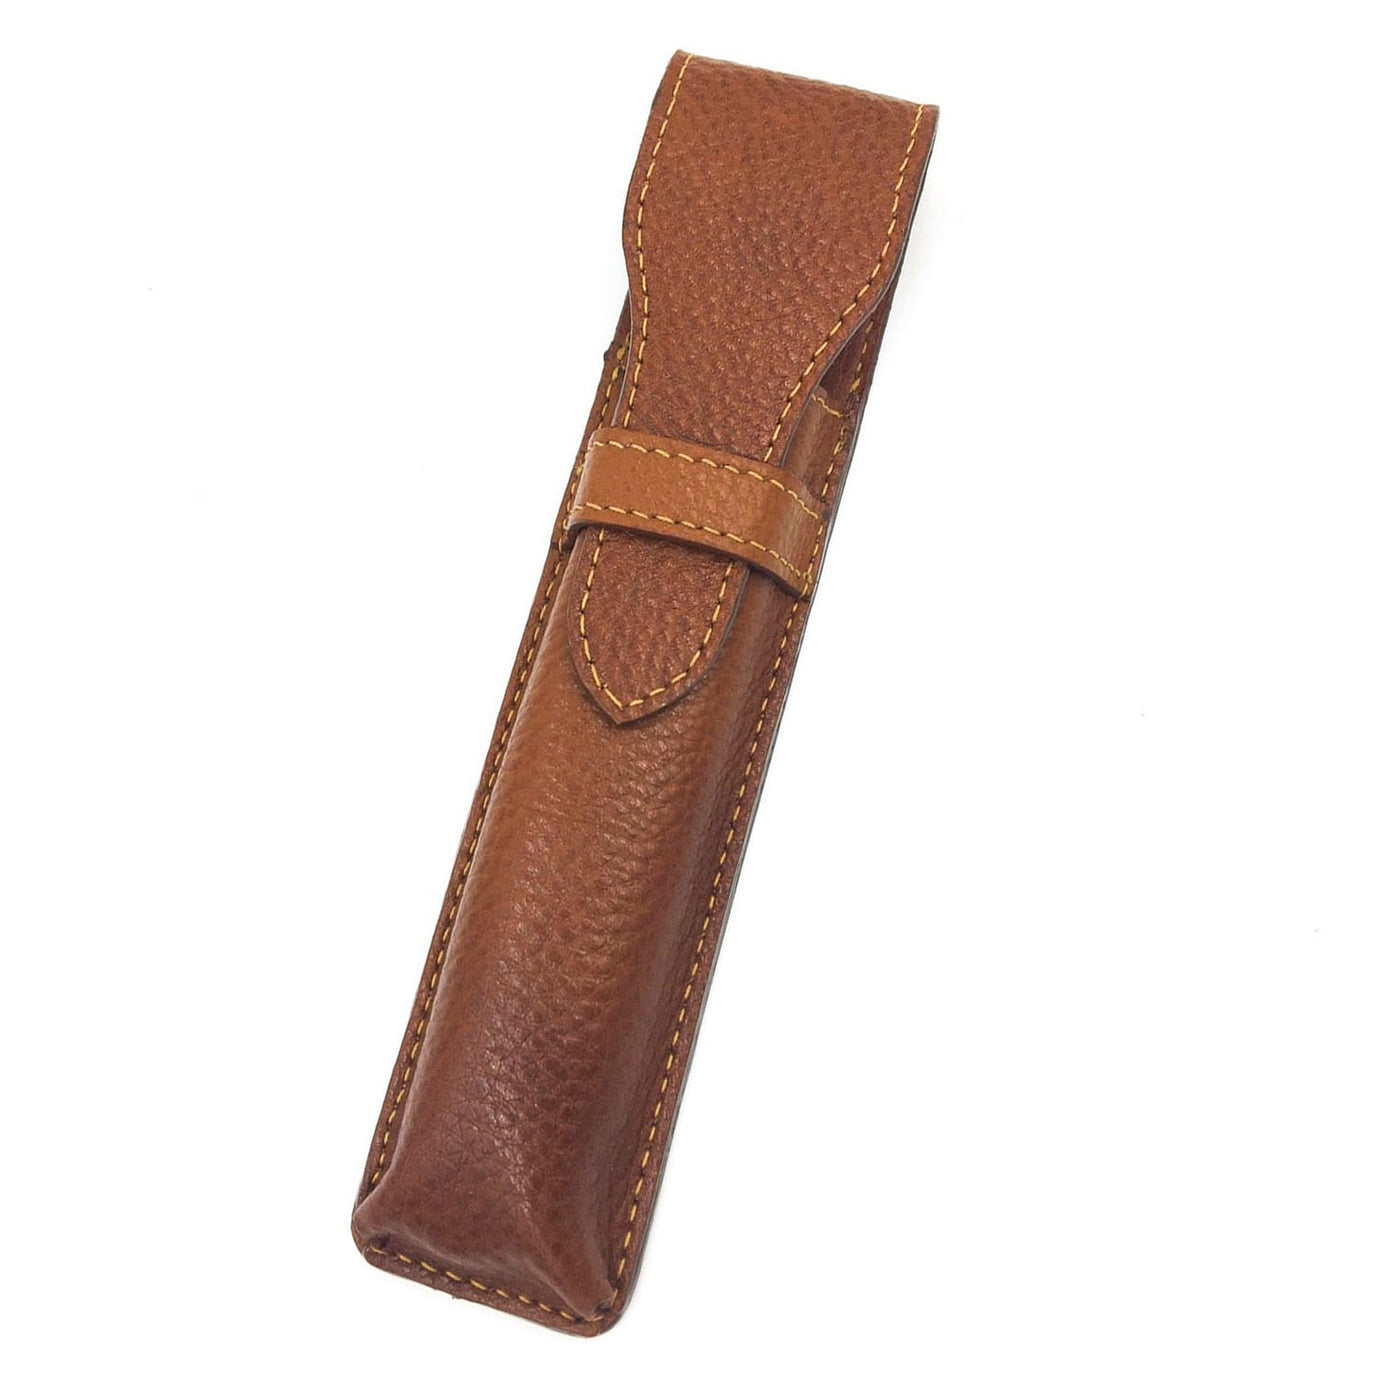  Parker Straight Razor Leather Pouch by Parker sold by Naked Armor Razors